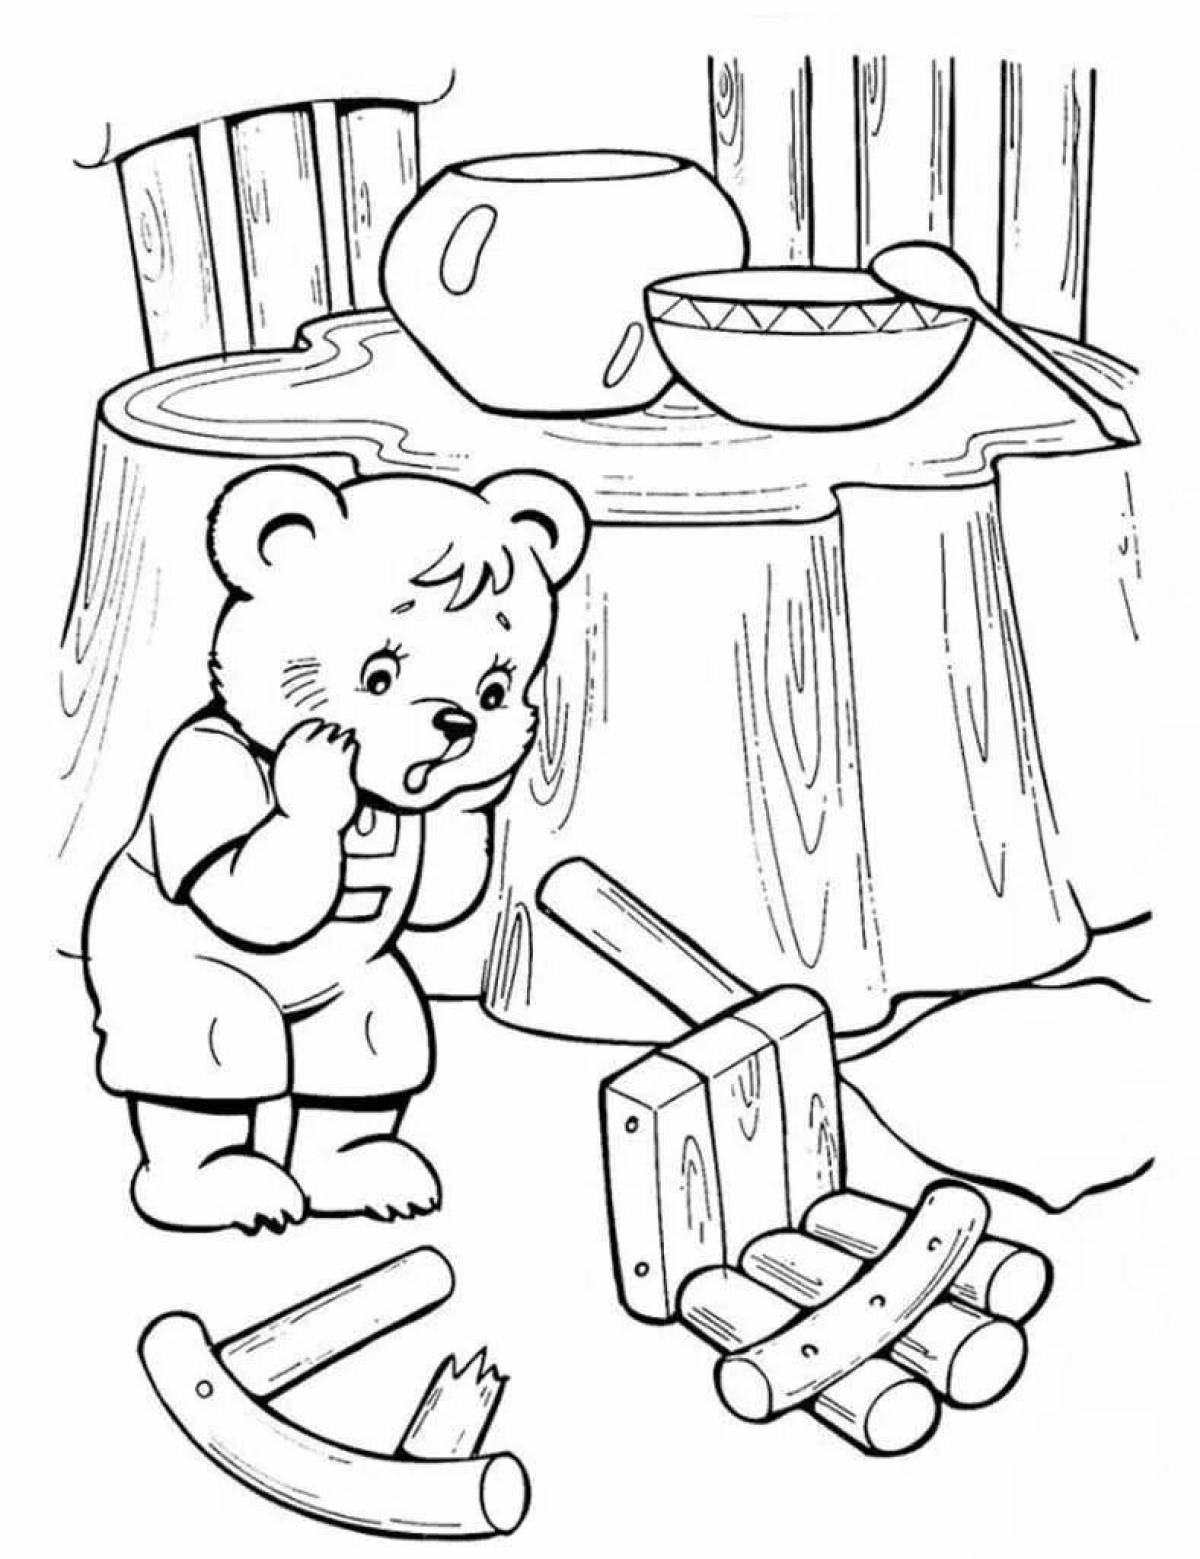 Coloring book shining three bears for children 2-3 years old